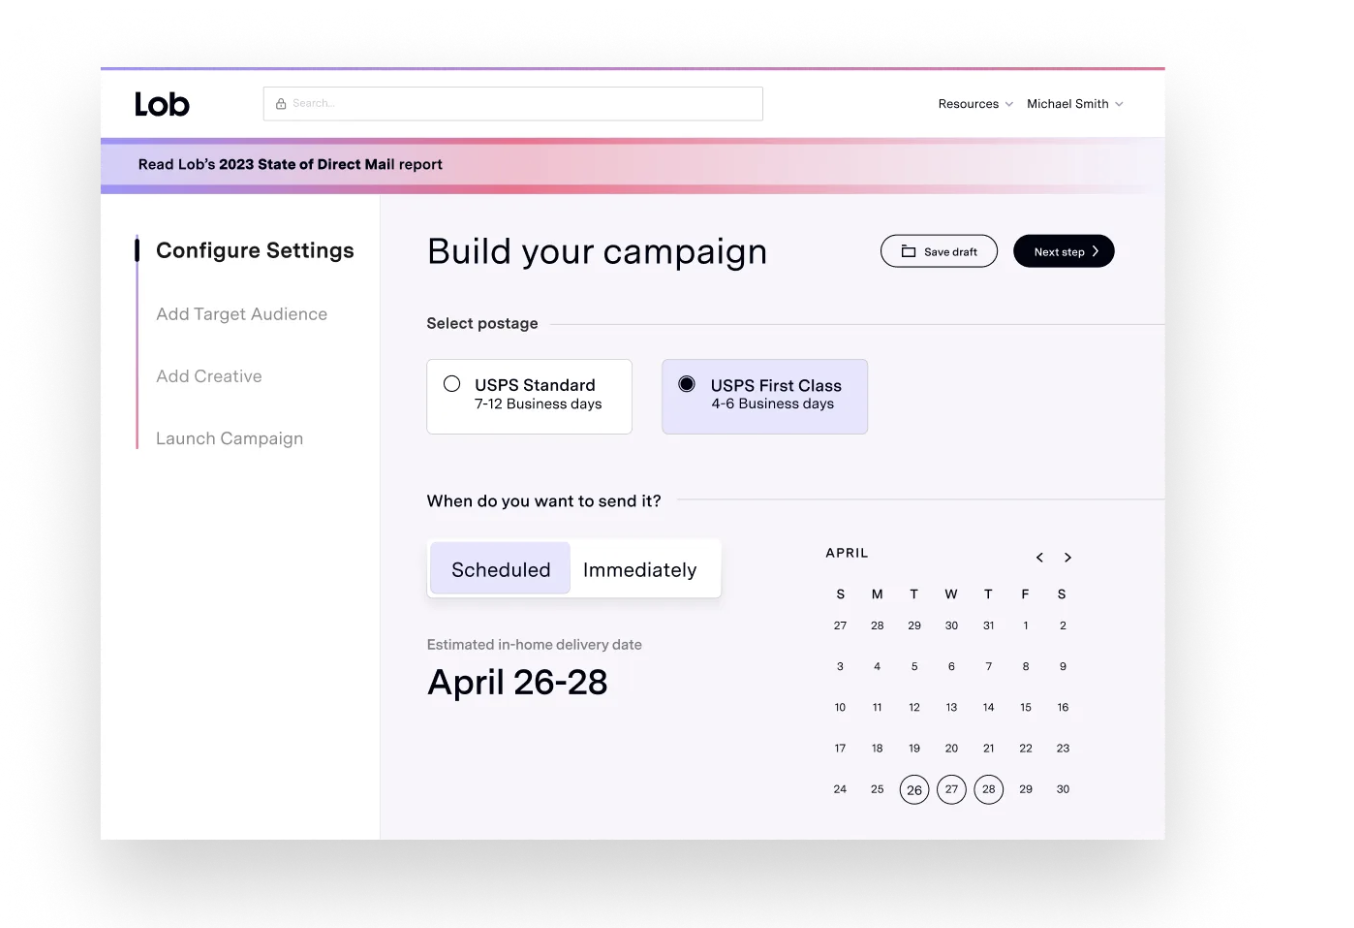 Set up and execute direct mail campaigns in minutes. Schedule ahead, send last-minute, or trigger campaigns based on customer behaviors or events.